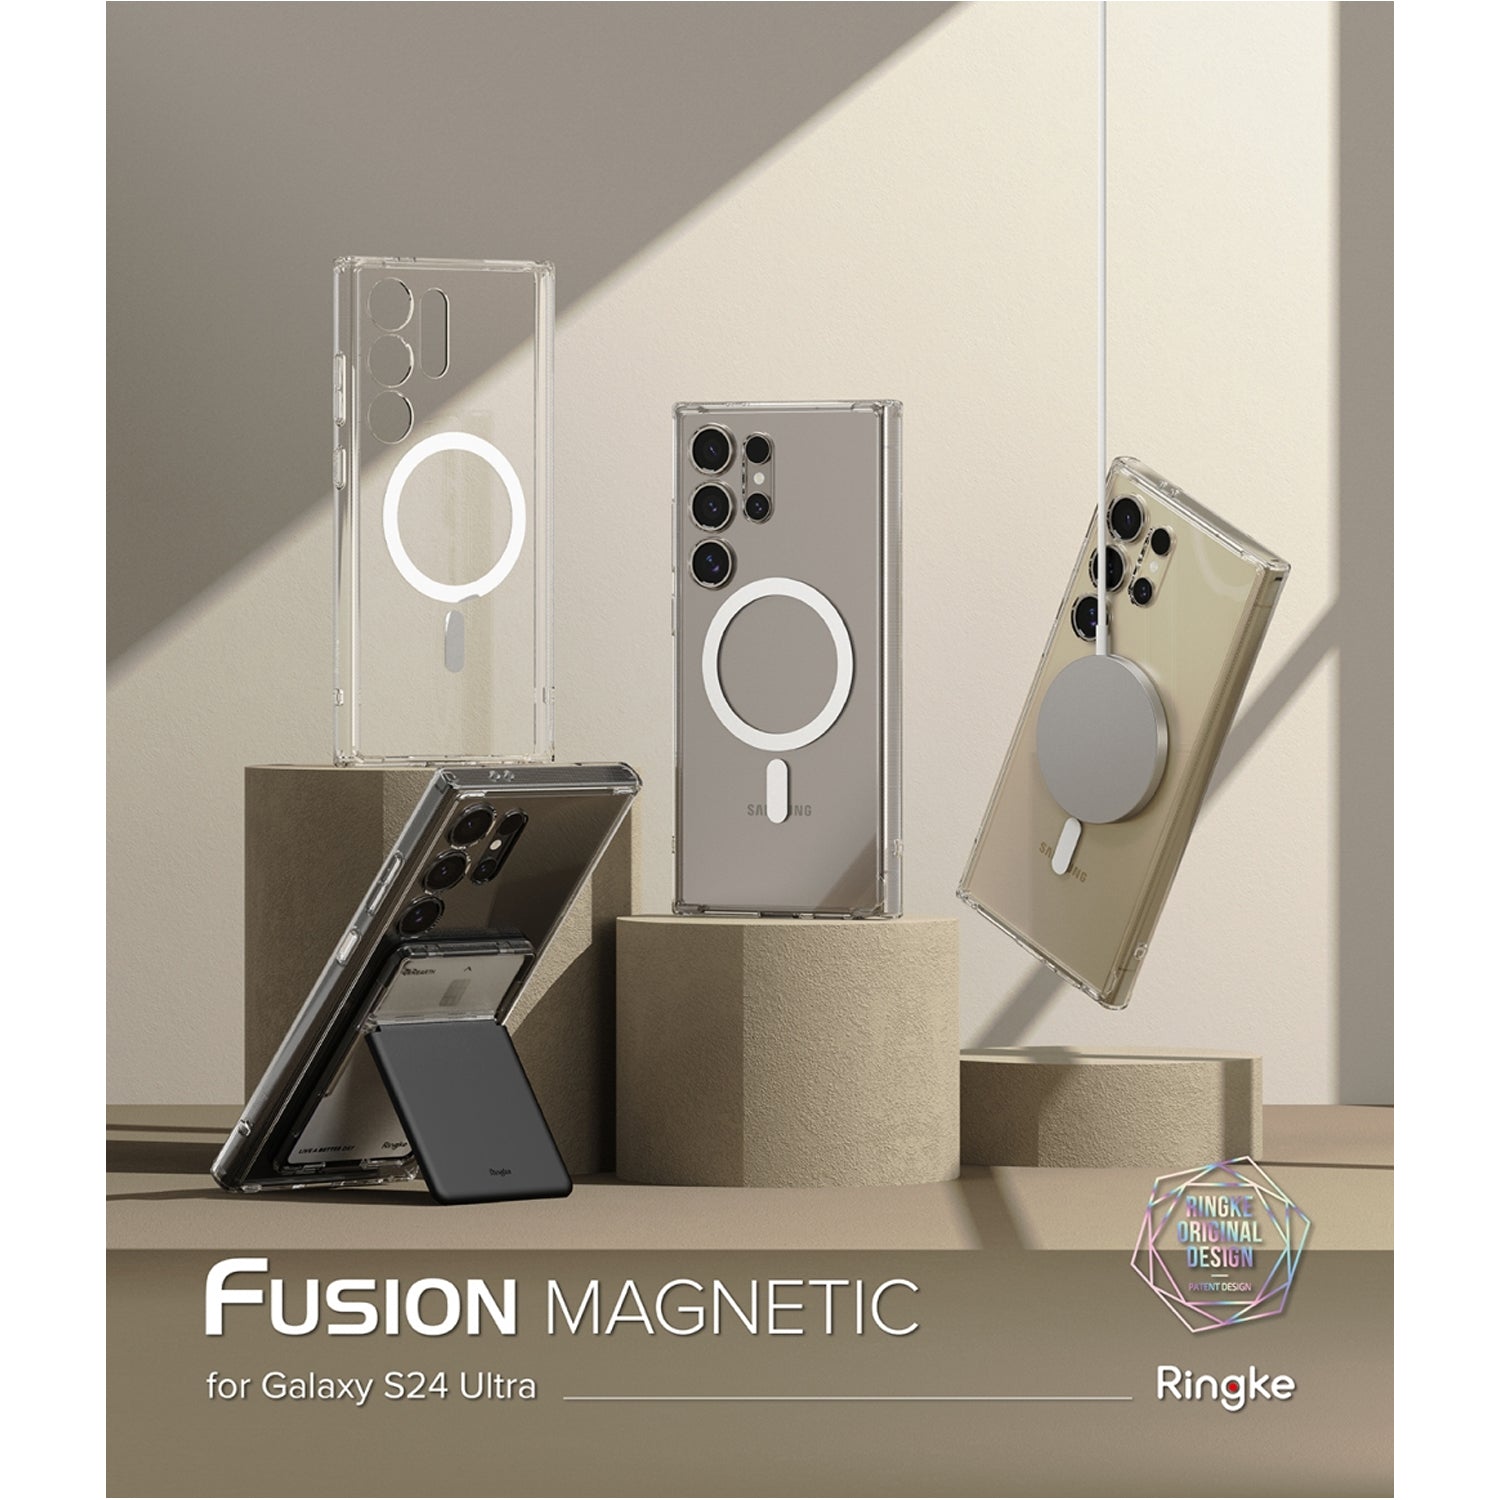 Ringke Fusion Magnetic Case for Samsung Galaxy S24 Ultra, Clear